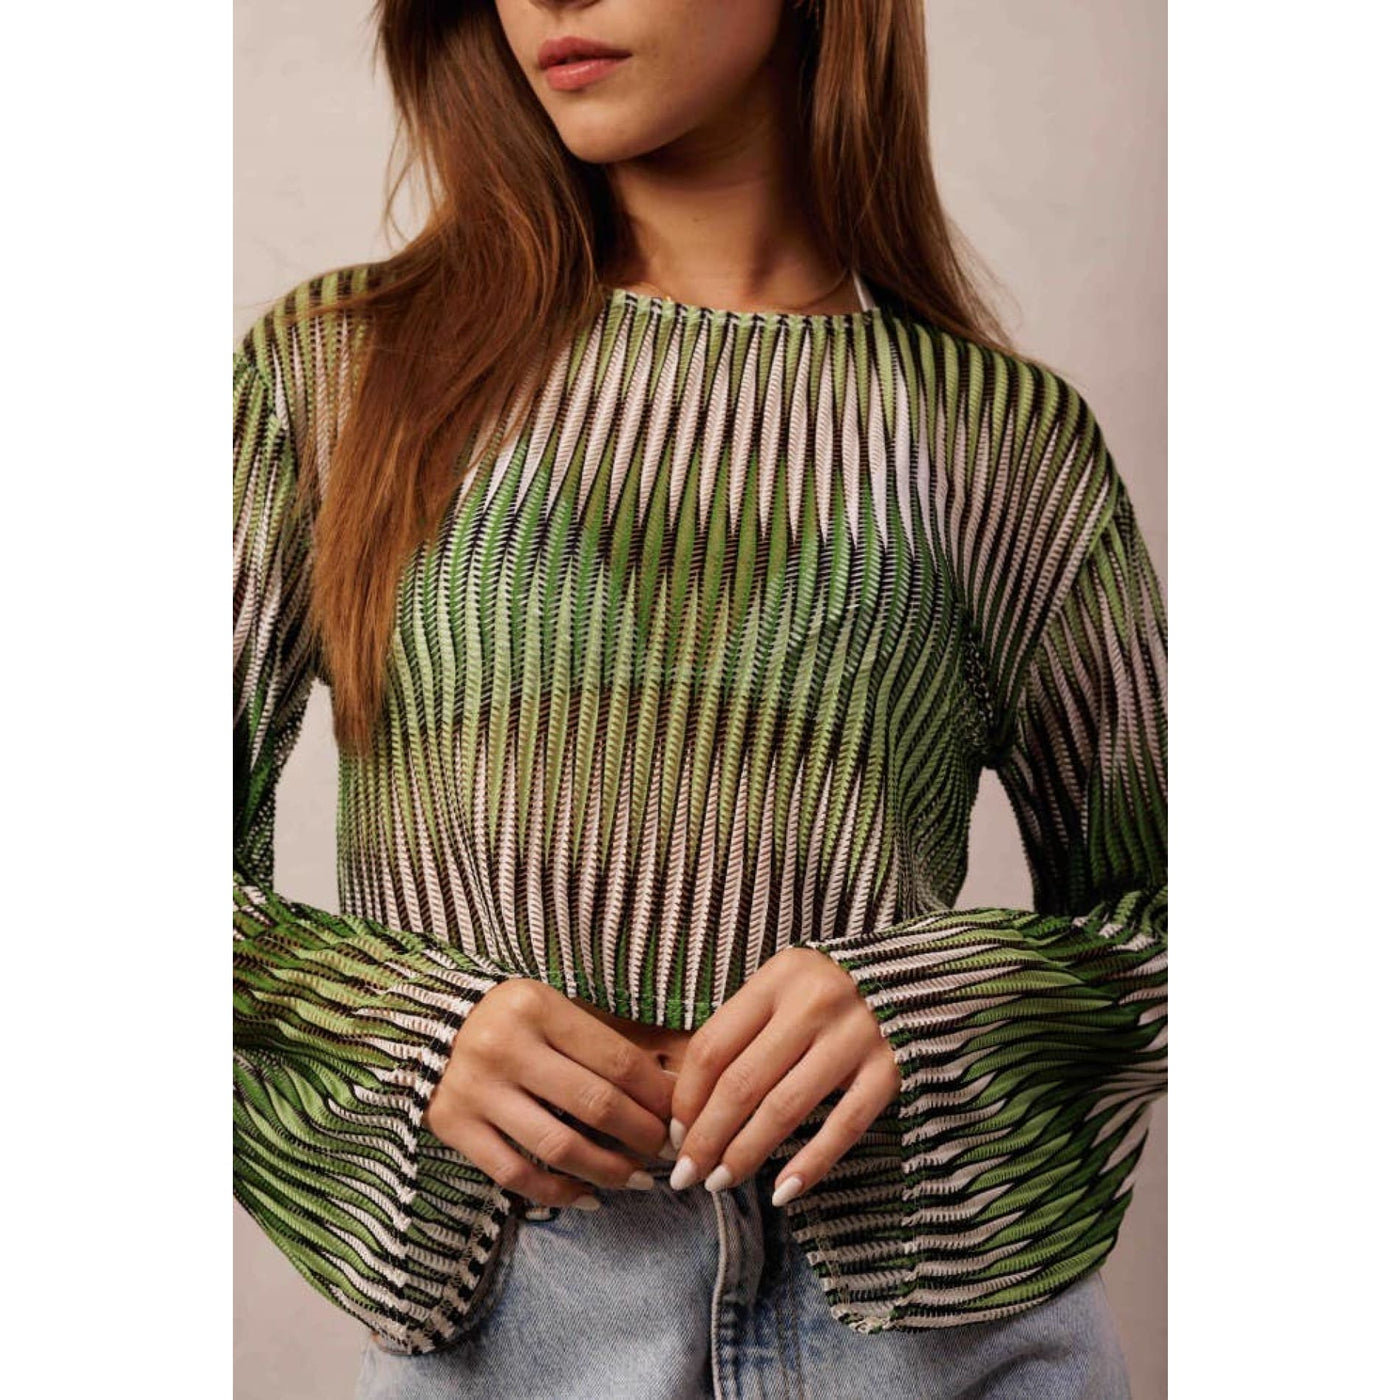 One That You Love Top - 120 Long Sleeve Tops